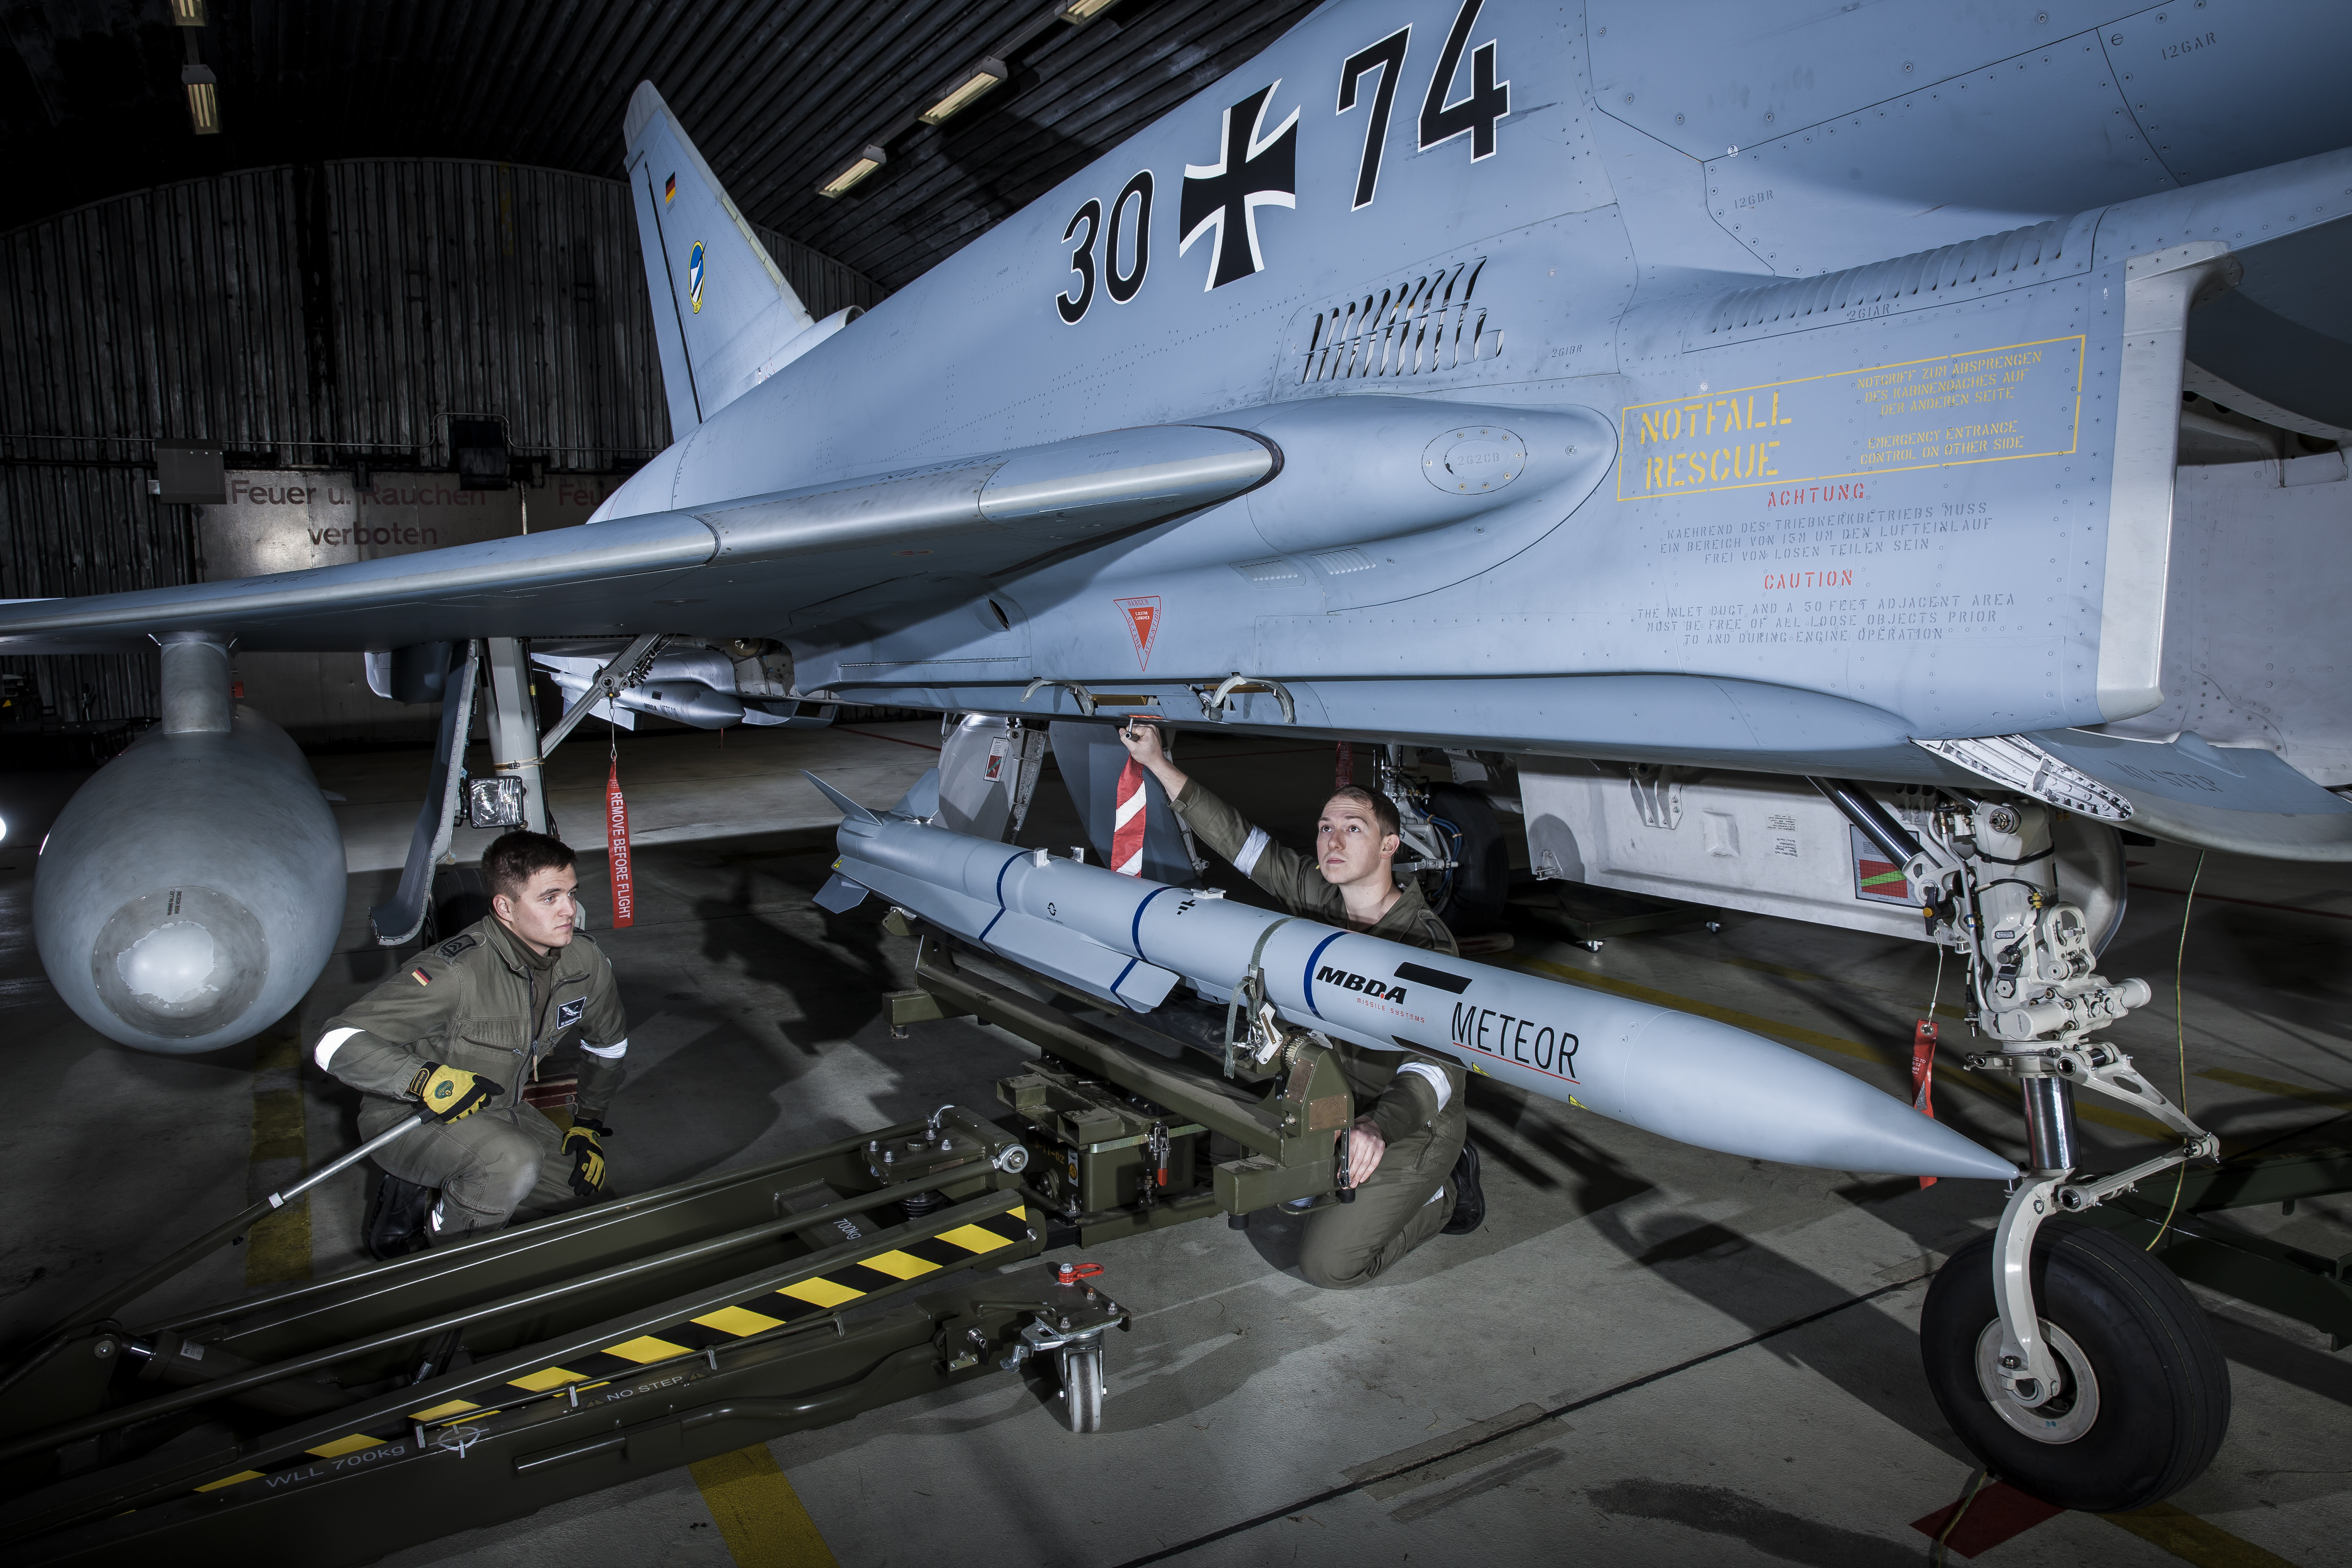 Luftwaffe ground personnel load a Meteor beyond visual-range air-to-air missile (BVRAAM) on a Eurofighter combat aircraft of the German Air Force's 74th Fighter Squadron, based at Neuburg Donau. (MBDA photo)